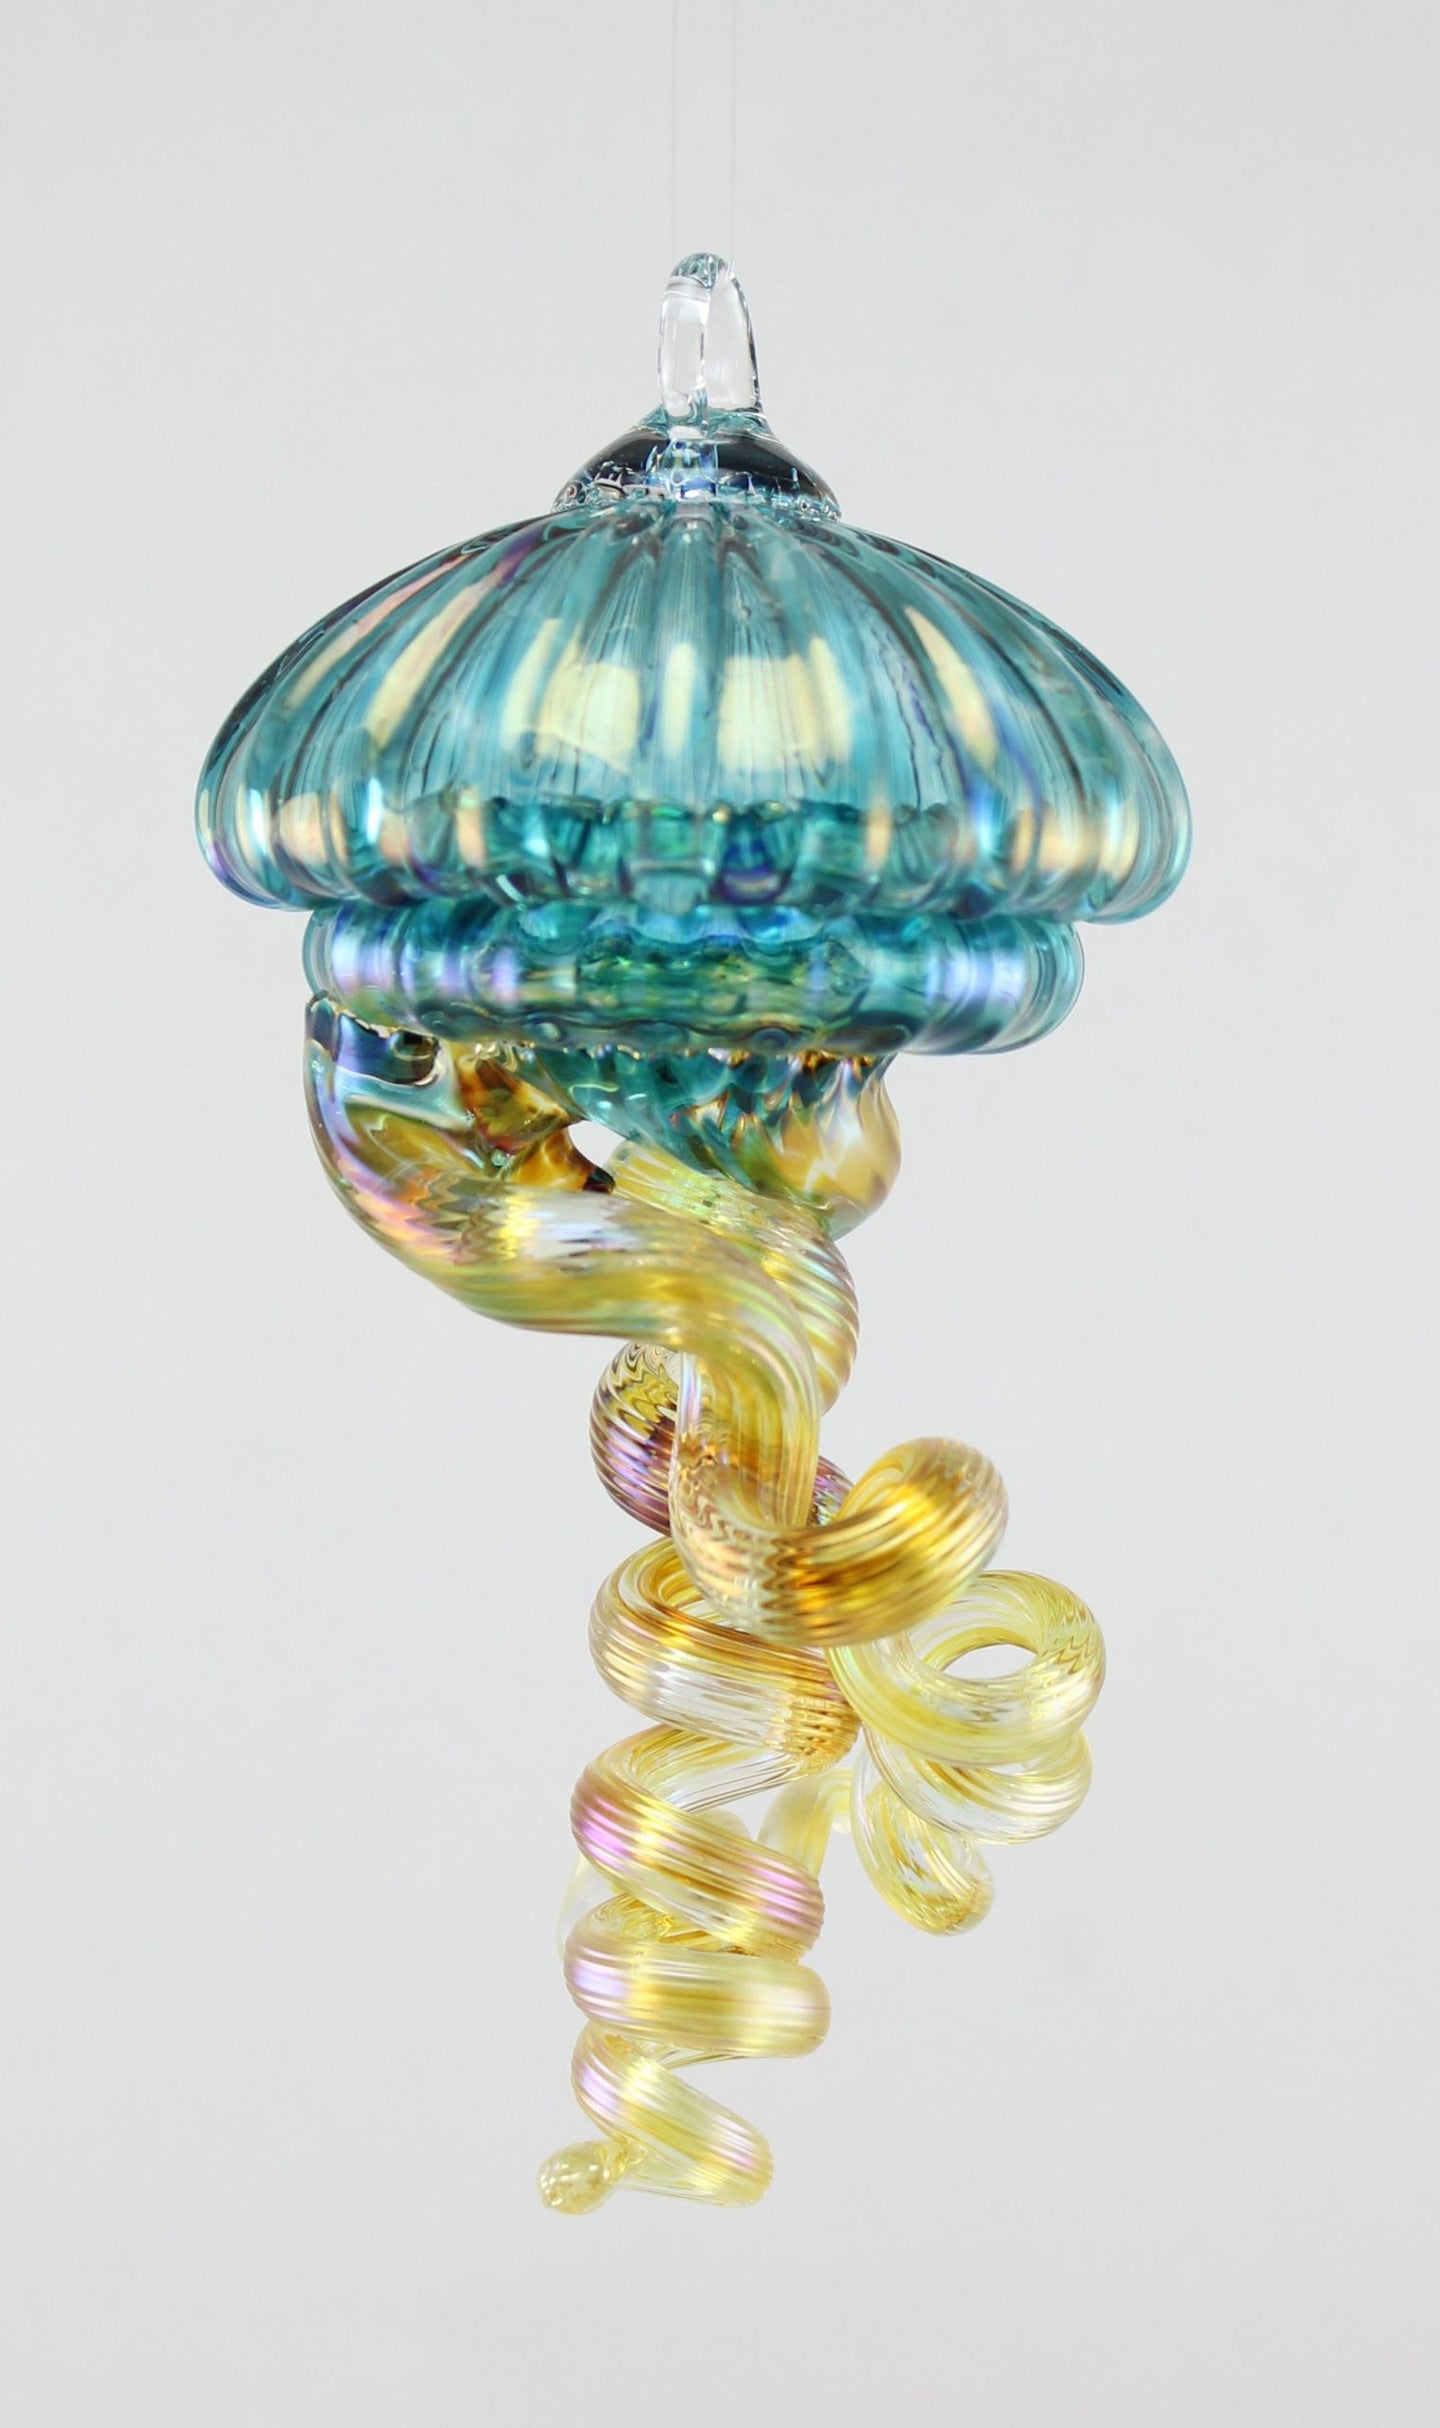 glass jellyfish sm. teal jelly